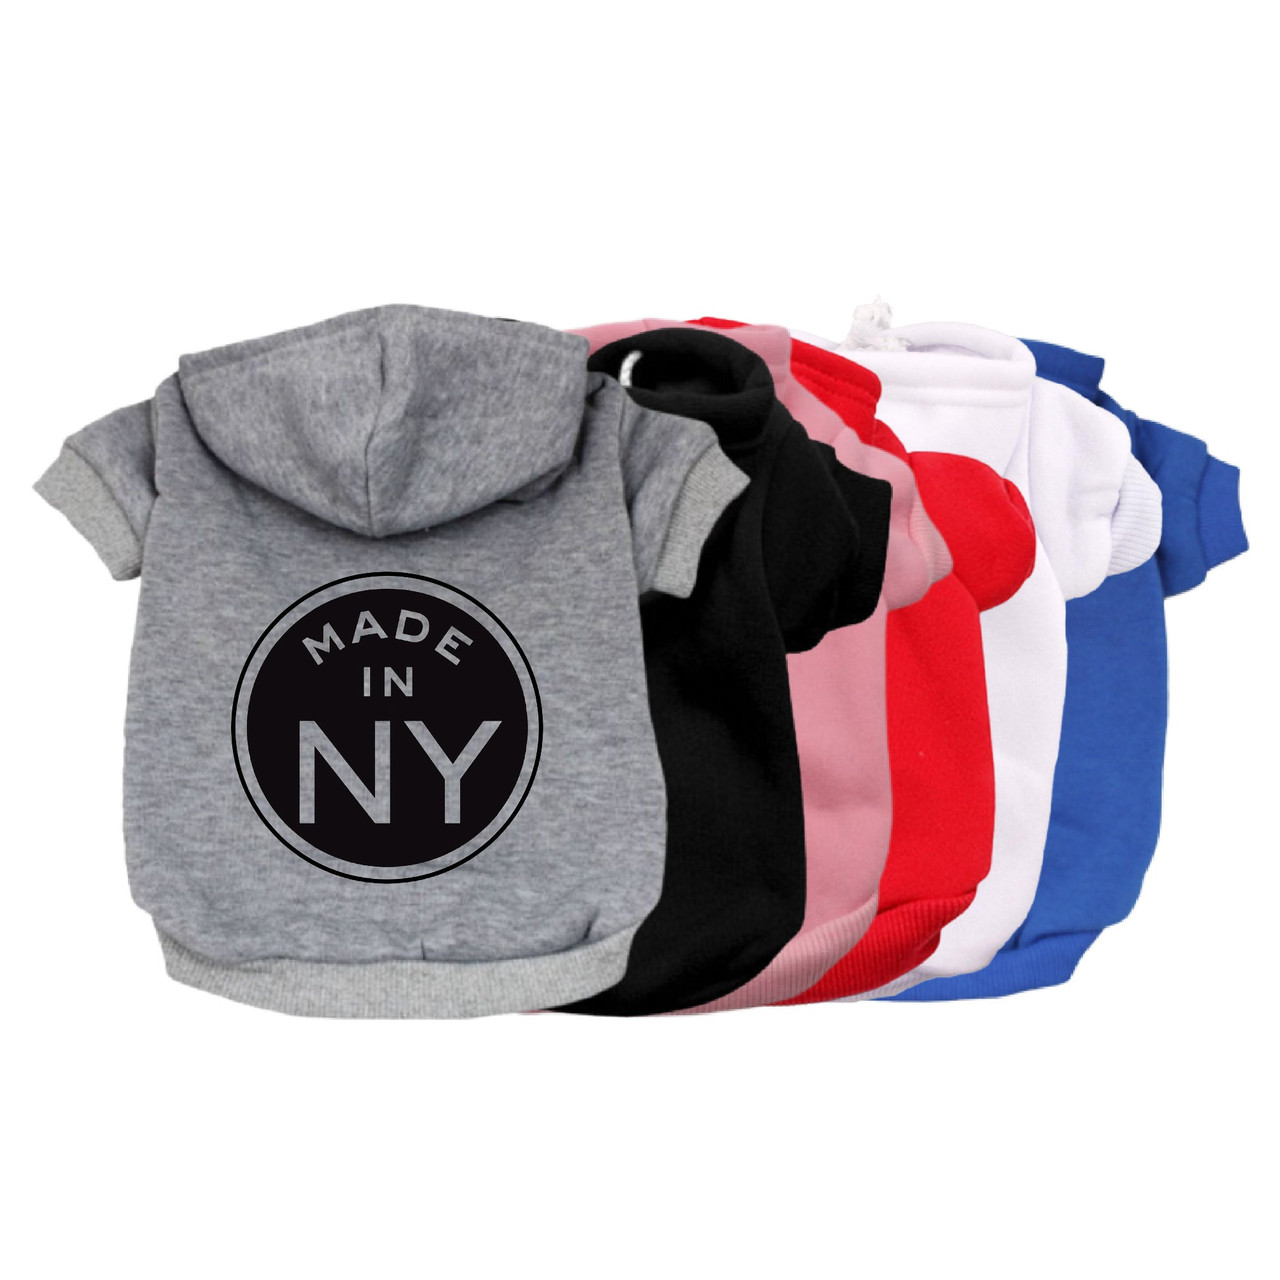 Made in New York Dog Hoodie exclusive at The Honest Dog